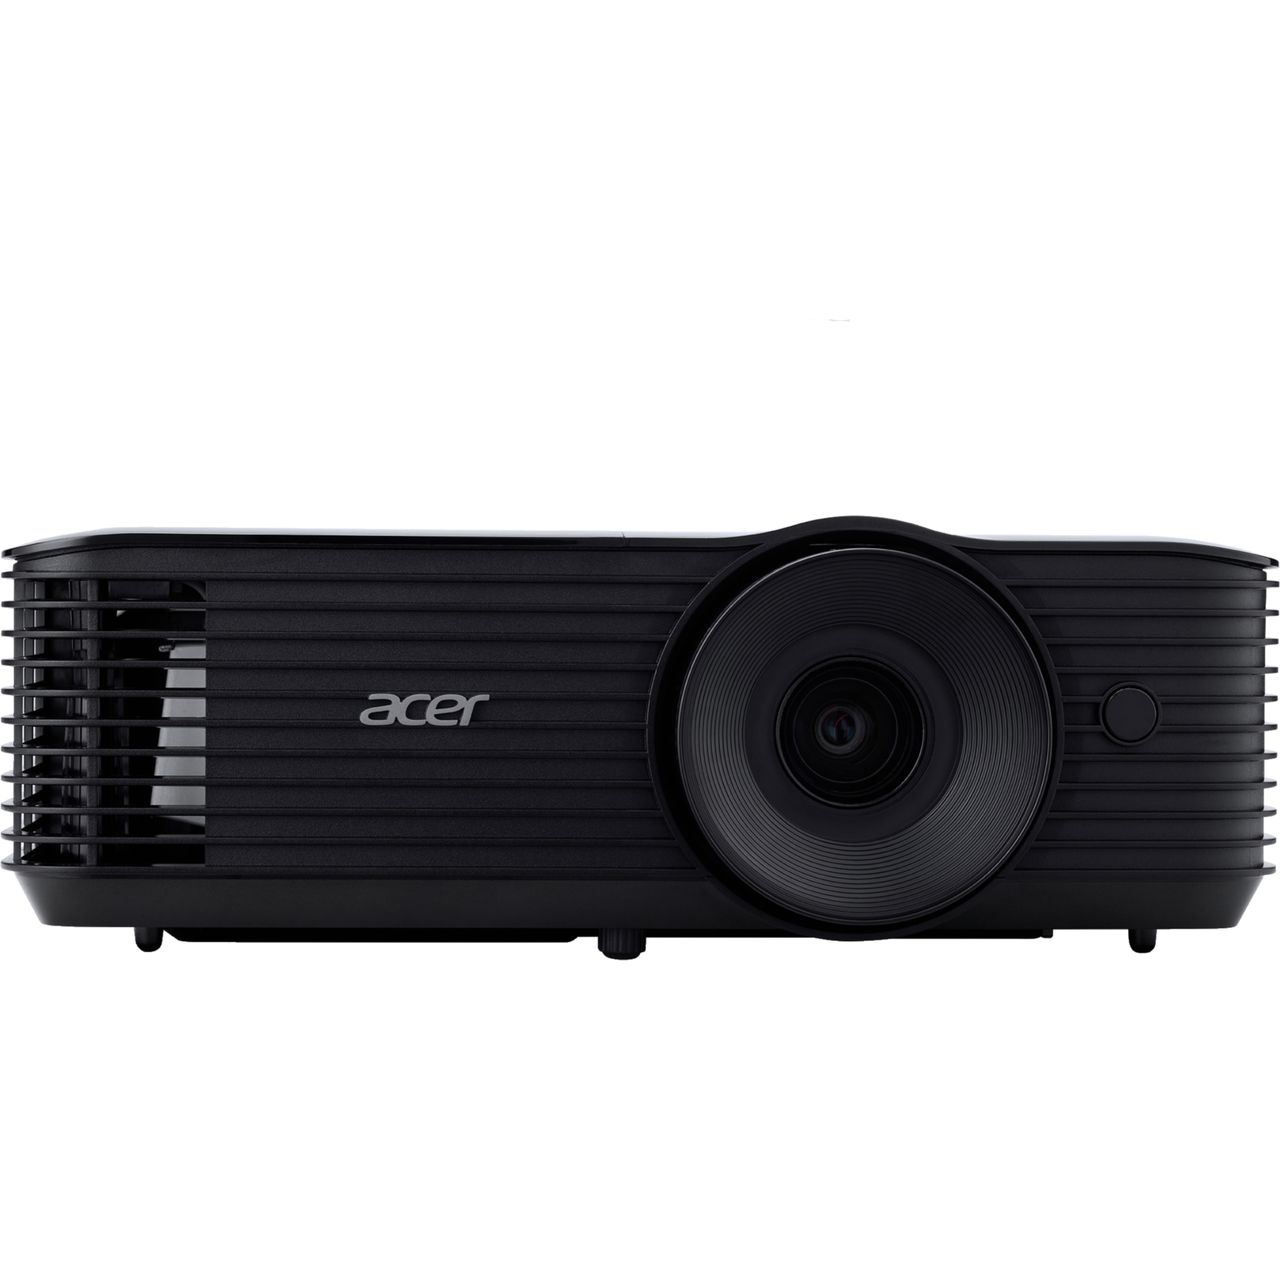 Acer X118HP Projector Review